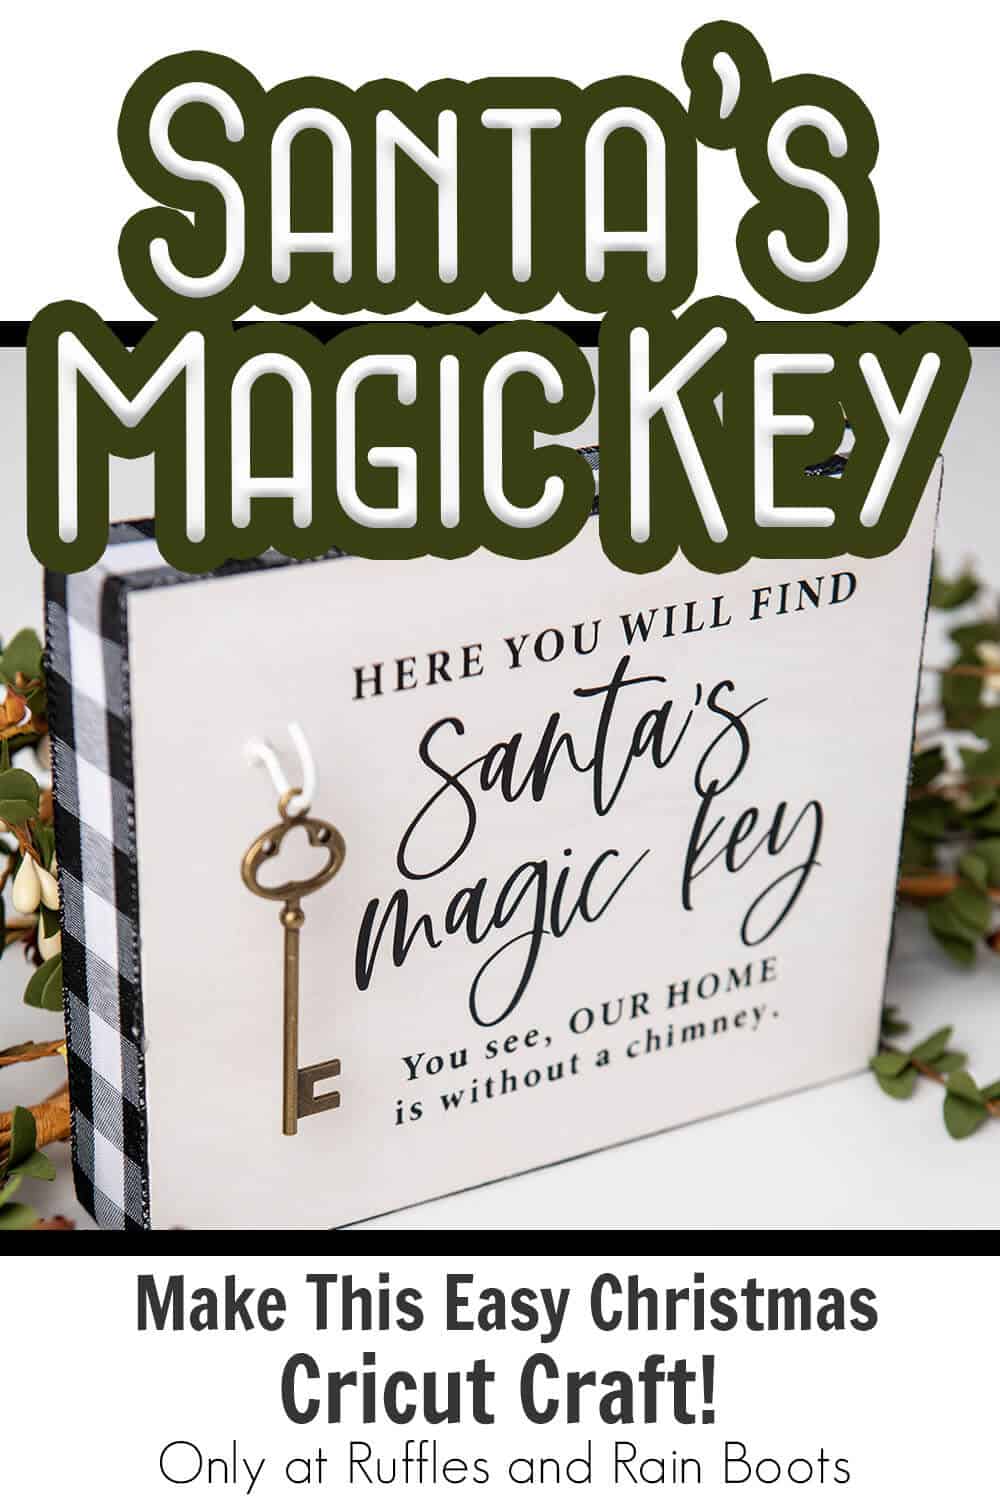 diy santa no chimney sign file set for cricut or silhouette with text which reads santa's magic key make this easy christmas cricut craft!